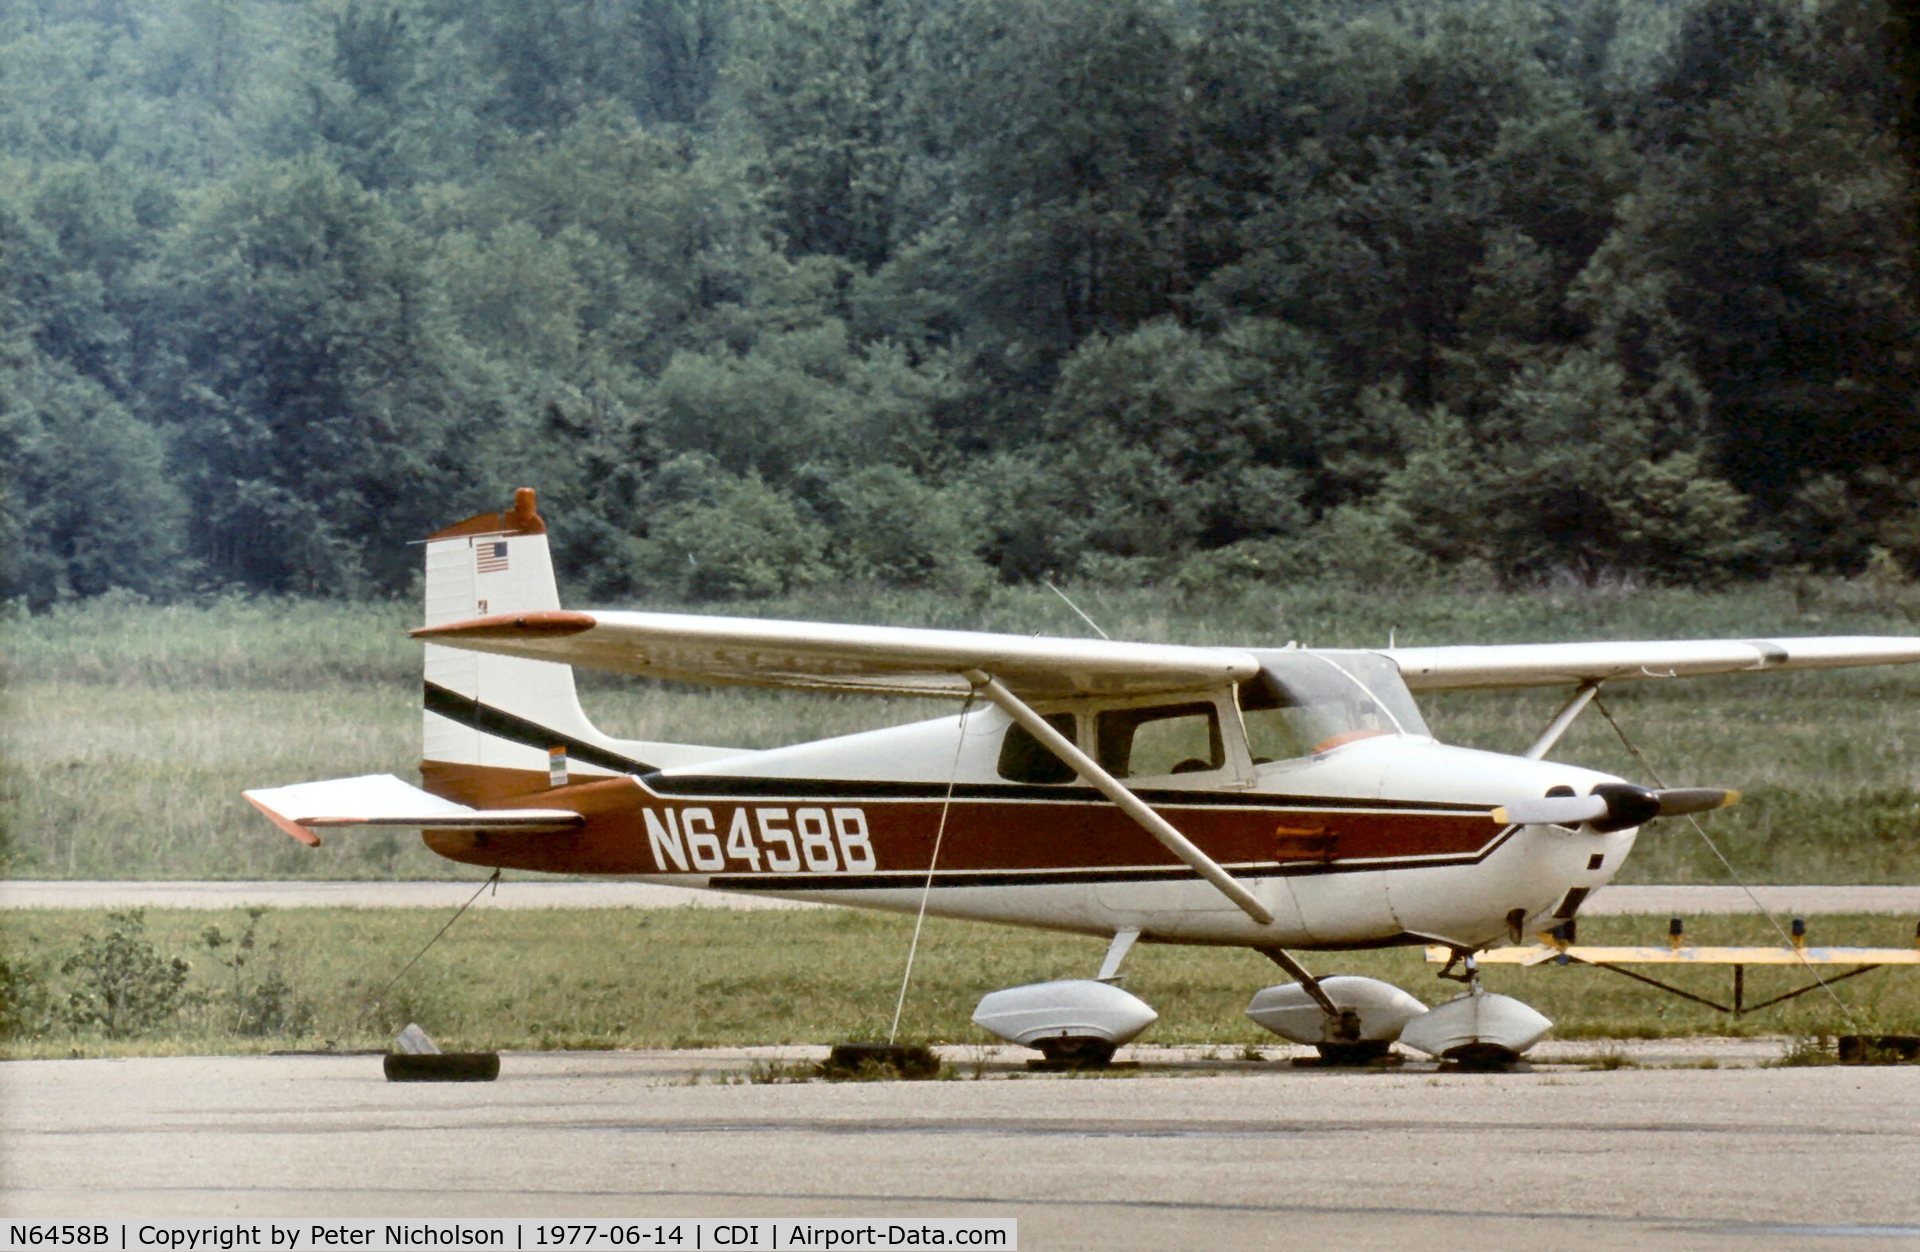 N6458B, 1956 Cessna 172 C/N 29658, This Skyhawk was seen at Cambridge in the Summer of 1977.